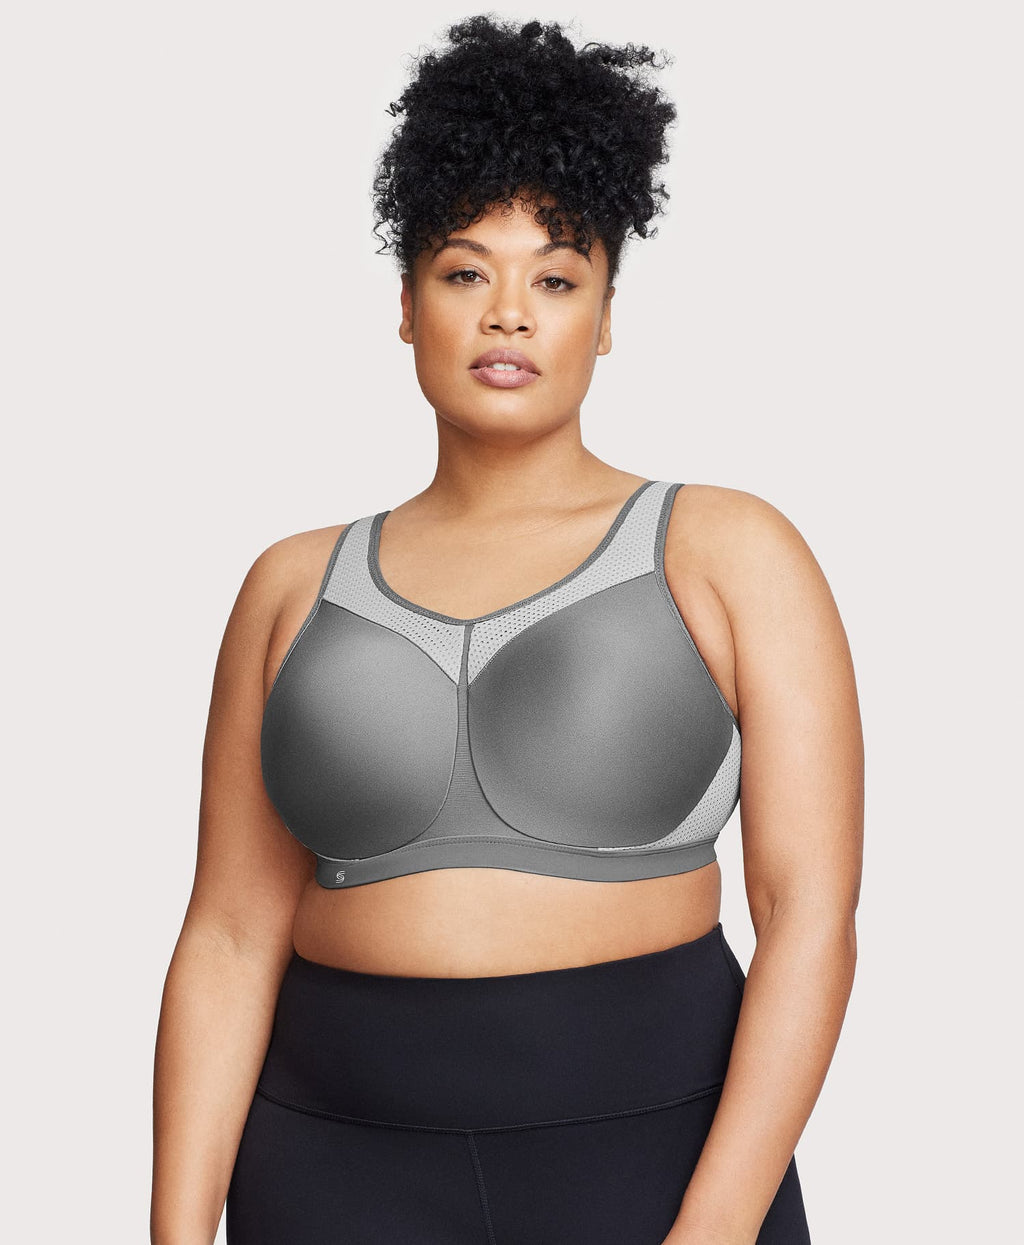 Glamorise Underwire High Impact Sports Bra 9066 Cafe 46D Size undefined -  $50 - From W